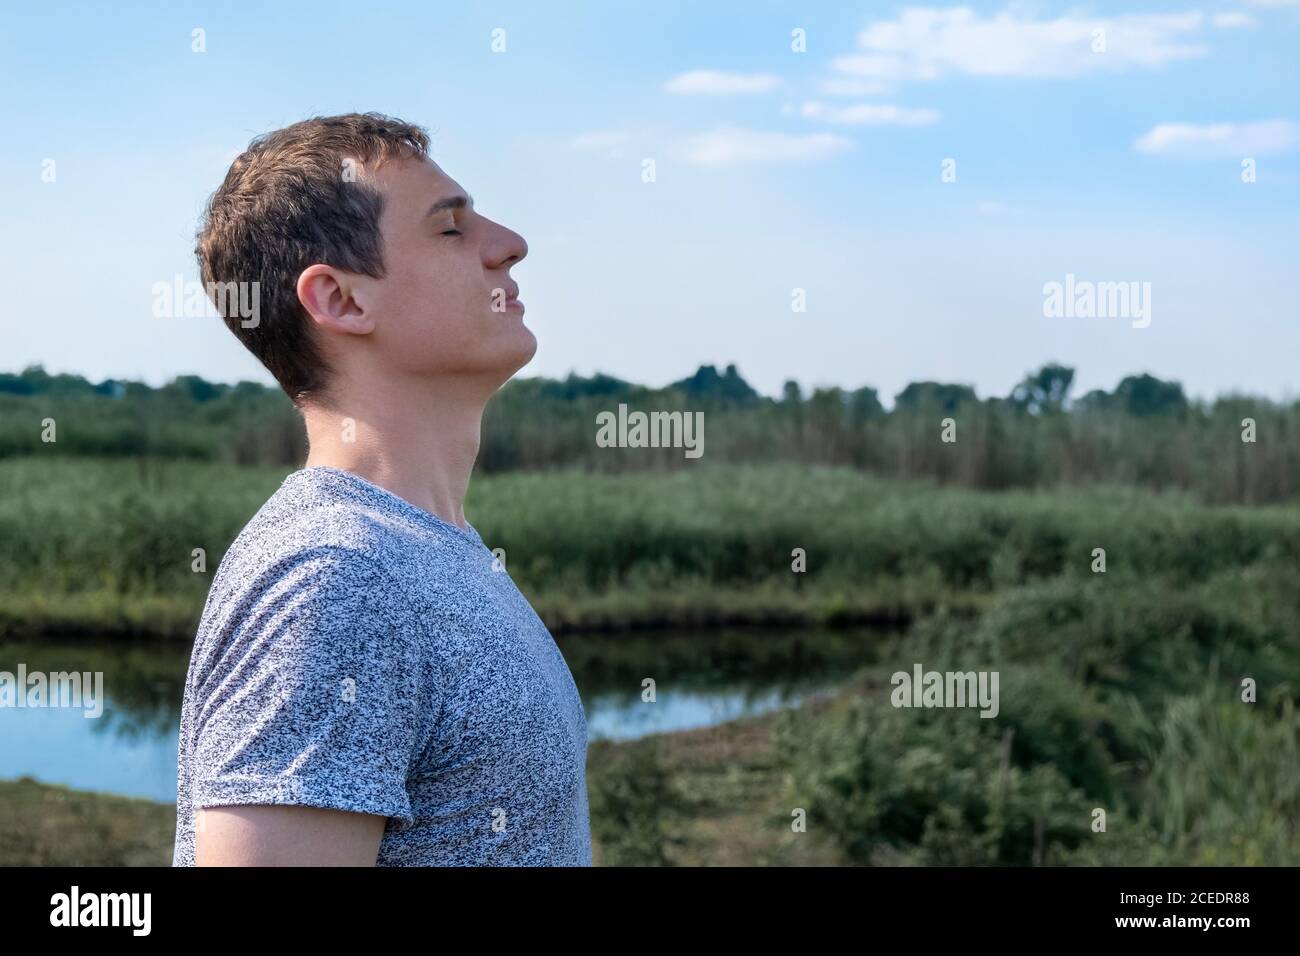 Relaxed adult man breathing fresh air outdoors with lake and field in the background Stock Photo